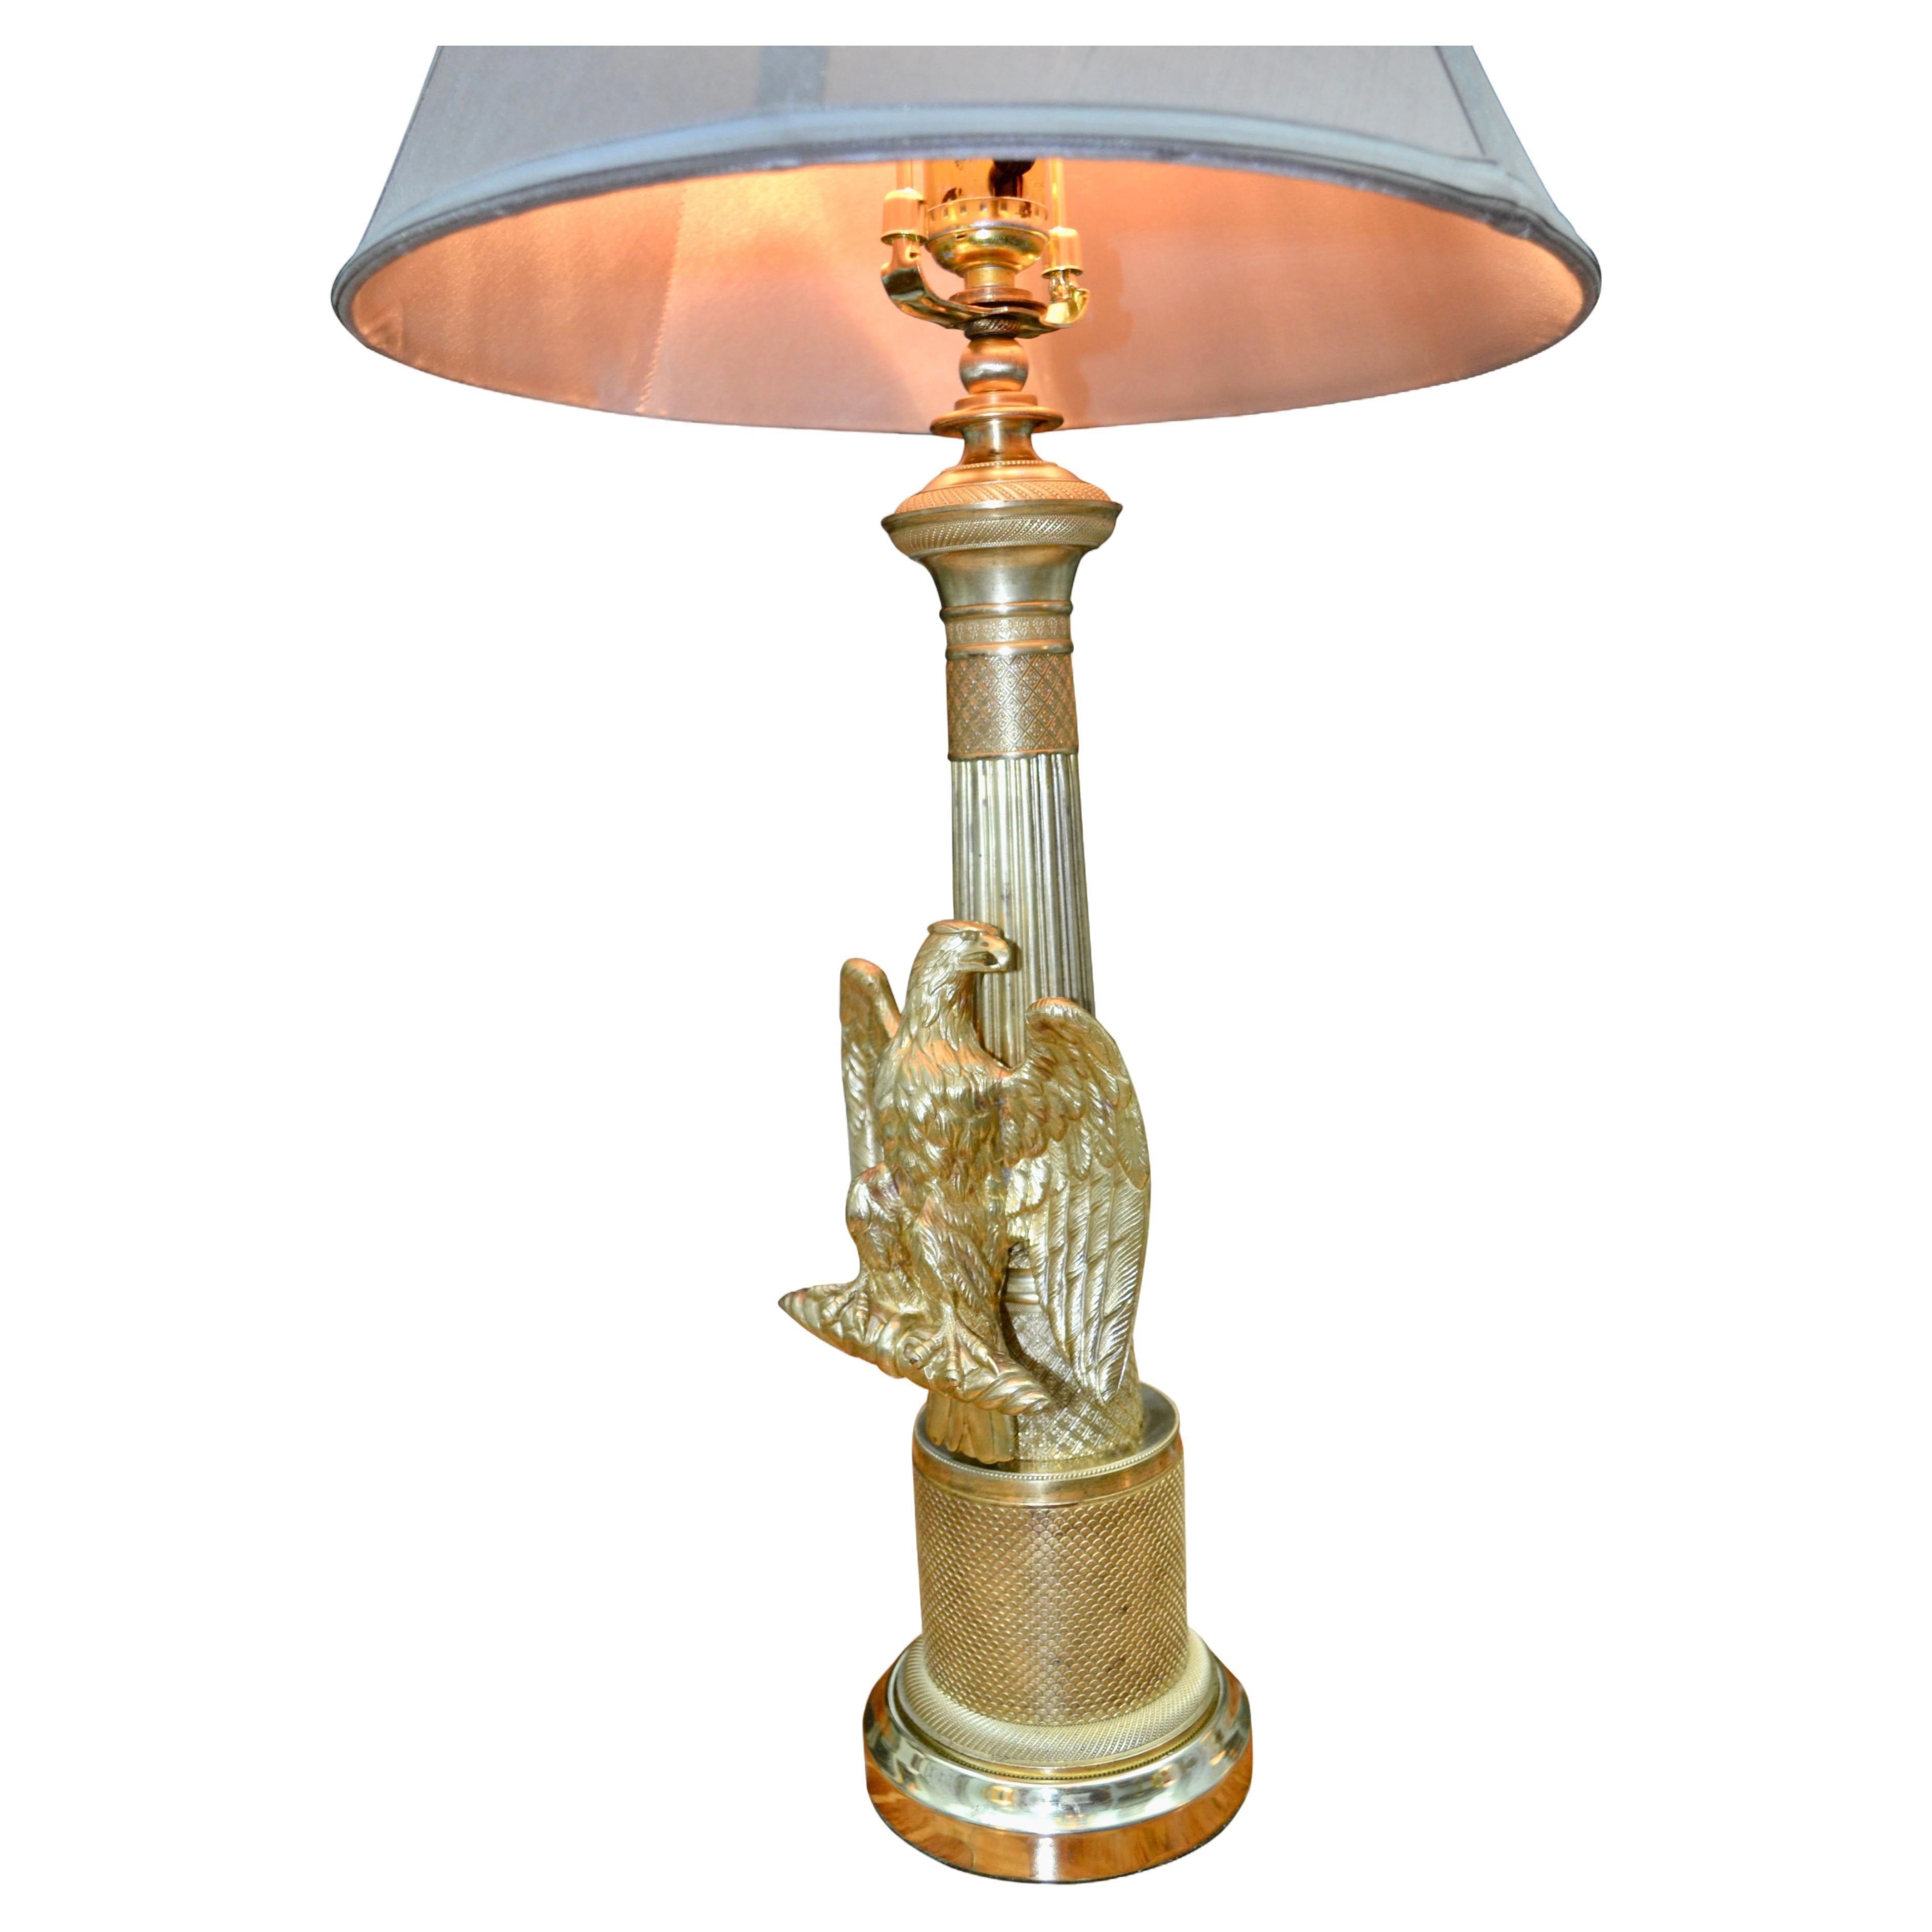 A  highly decorative French empire style lamp likely made in the early 20thC. The polished brass column was likely the stem of a candelabra which was later embellished with an eagle standing on a fascia with his wings outstretched. The brass has